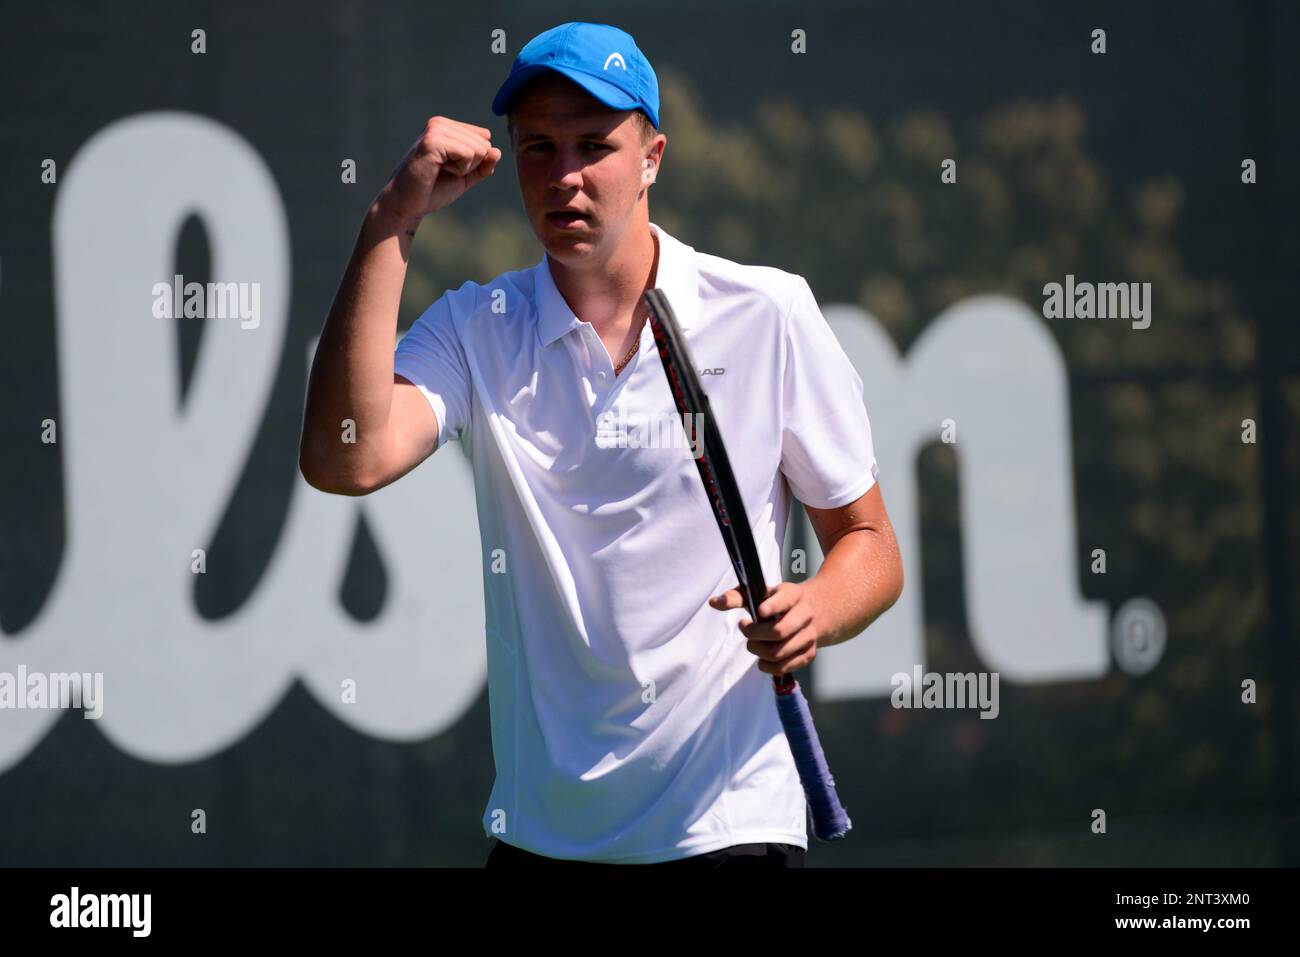 August 24, 2019, College Park, Maryland, U.S: Karlis Ozolins of Latvia in  action in the final of the Wayne K. Curry Prince George's County  International Junior Tennis Championships in College Park Maryland. (